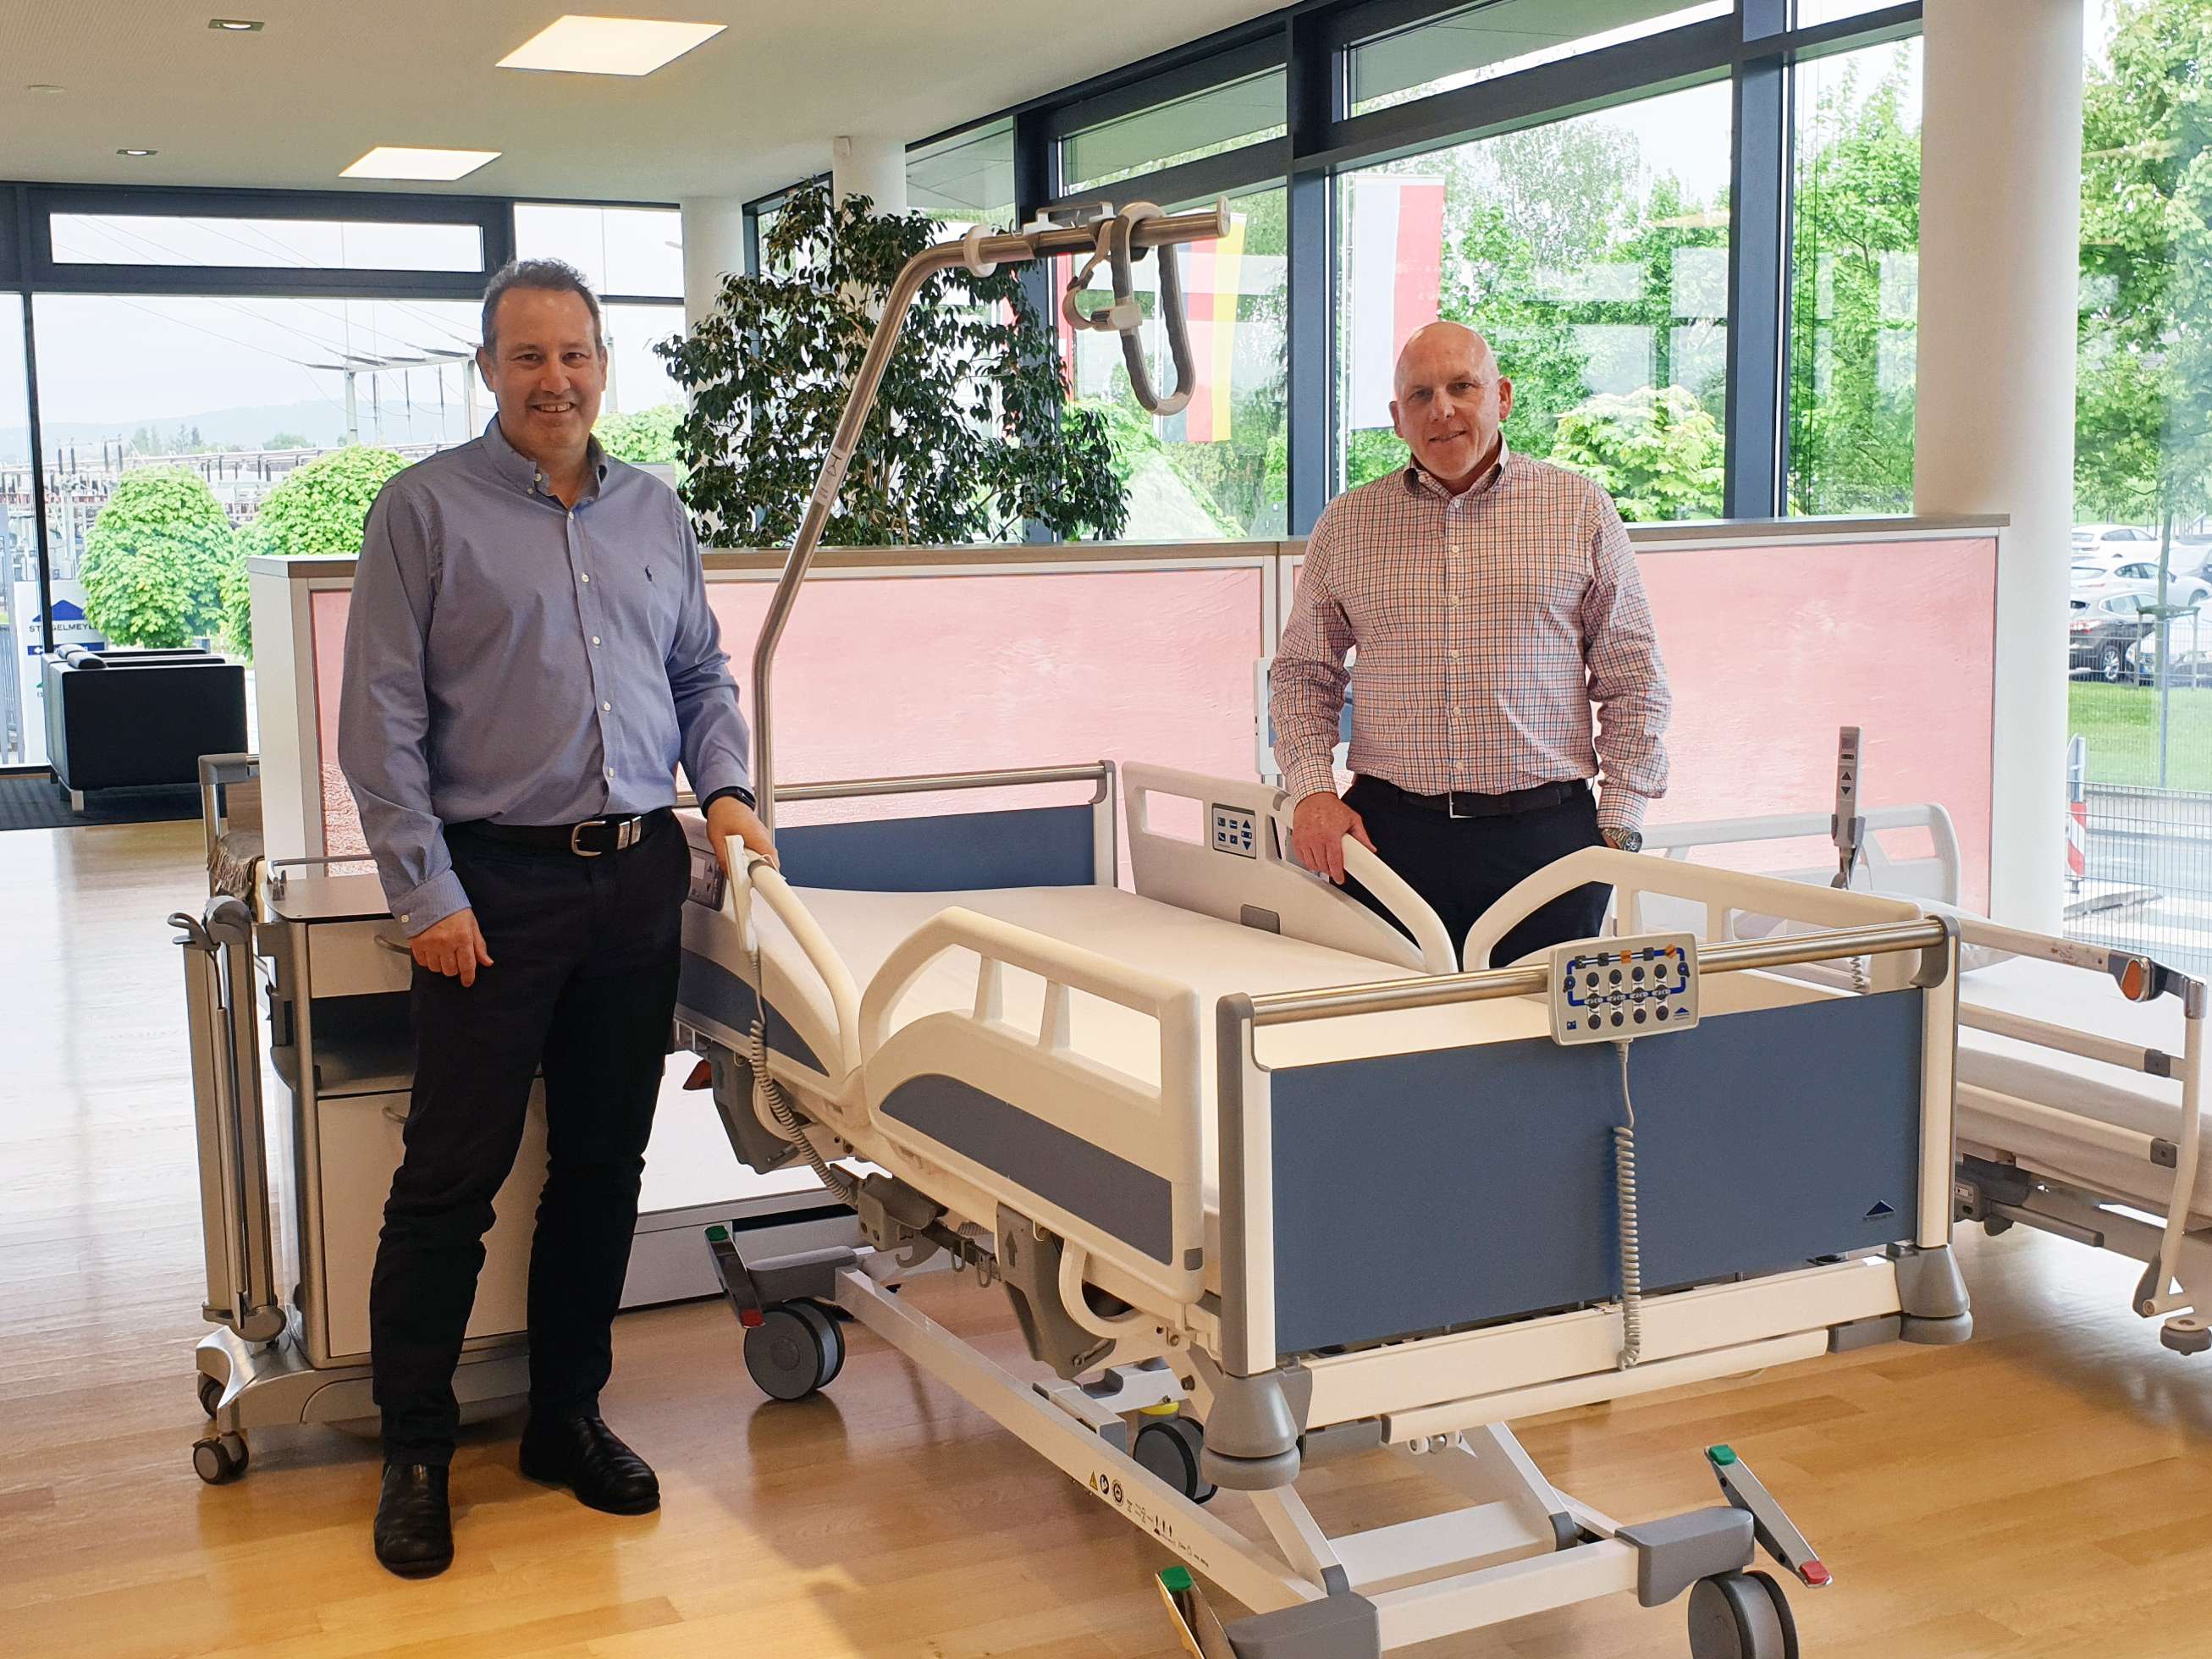 Tim Cohen and Chris Pearson from Innovate Care with the Stiegelmeyer hospital bed Evario